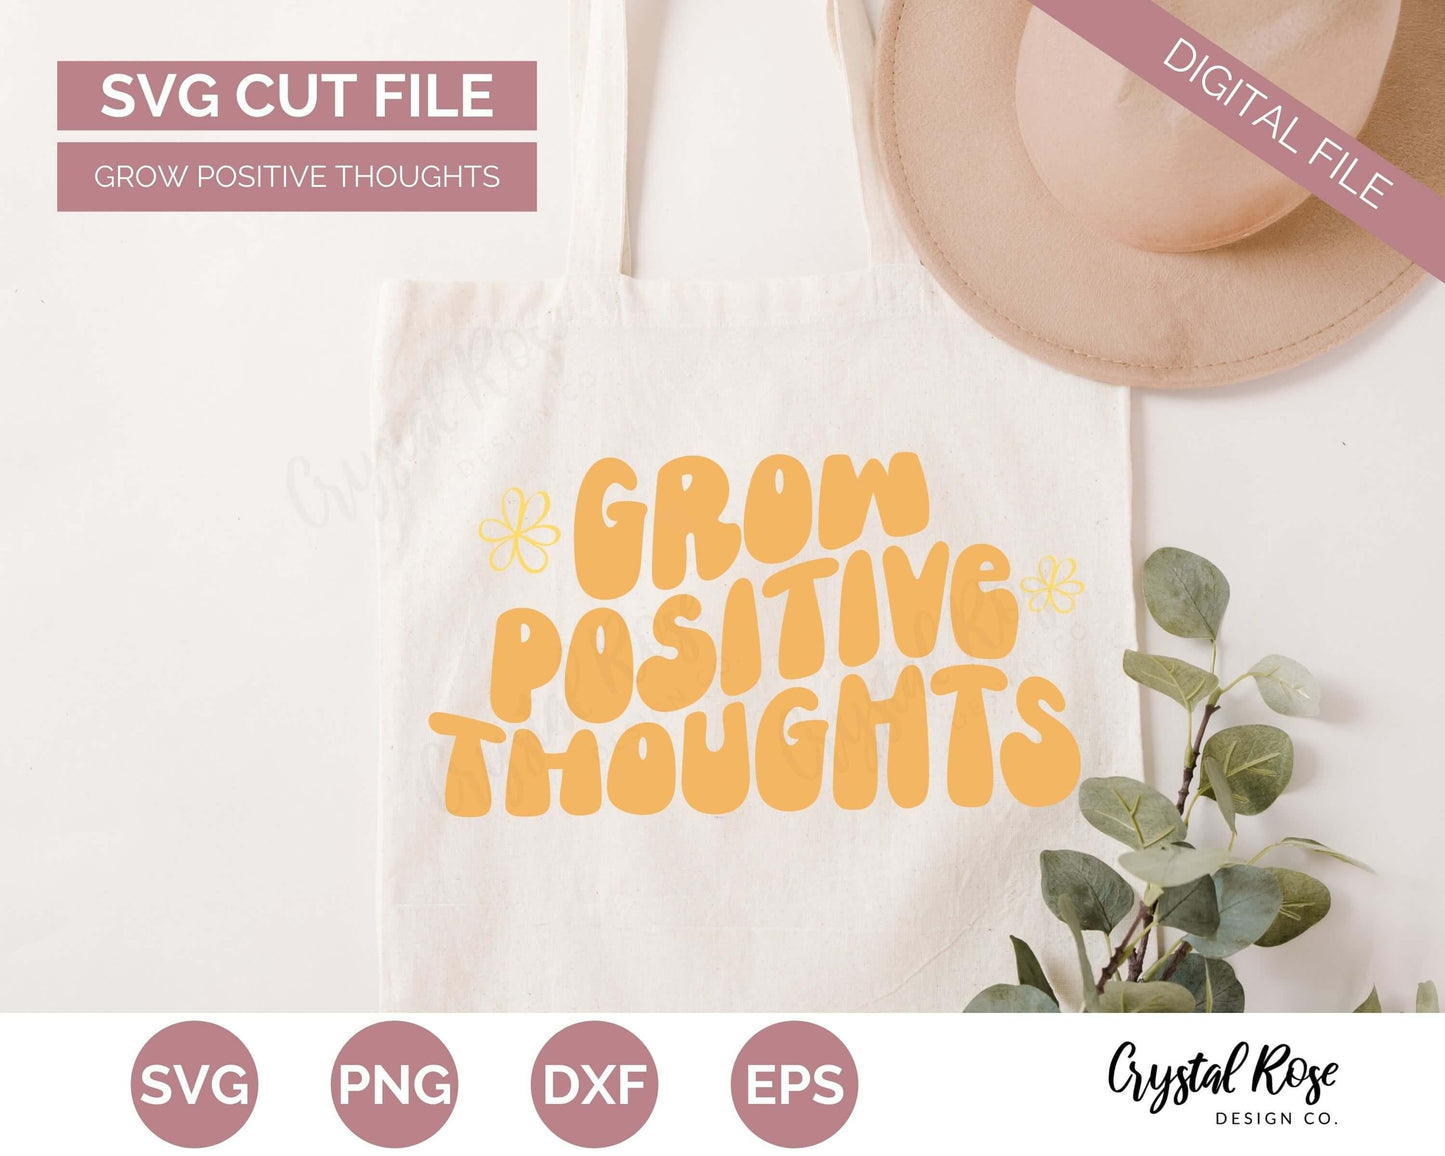 Retro Grow Positive Thoughts SVG, Inspirational SVG, Digital Download, Cricut, Silhouette, Glowforge (includes svg/png/dxf/eps) - Crystal Rose Design Co.